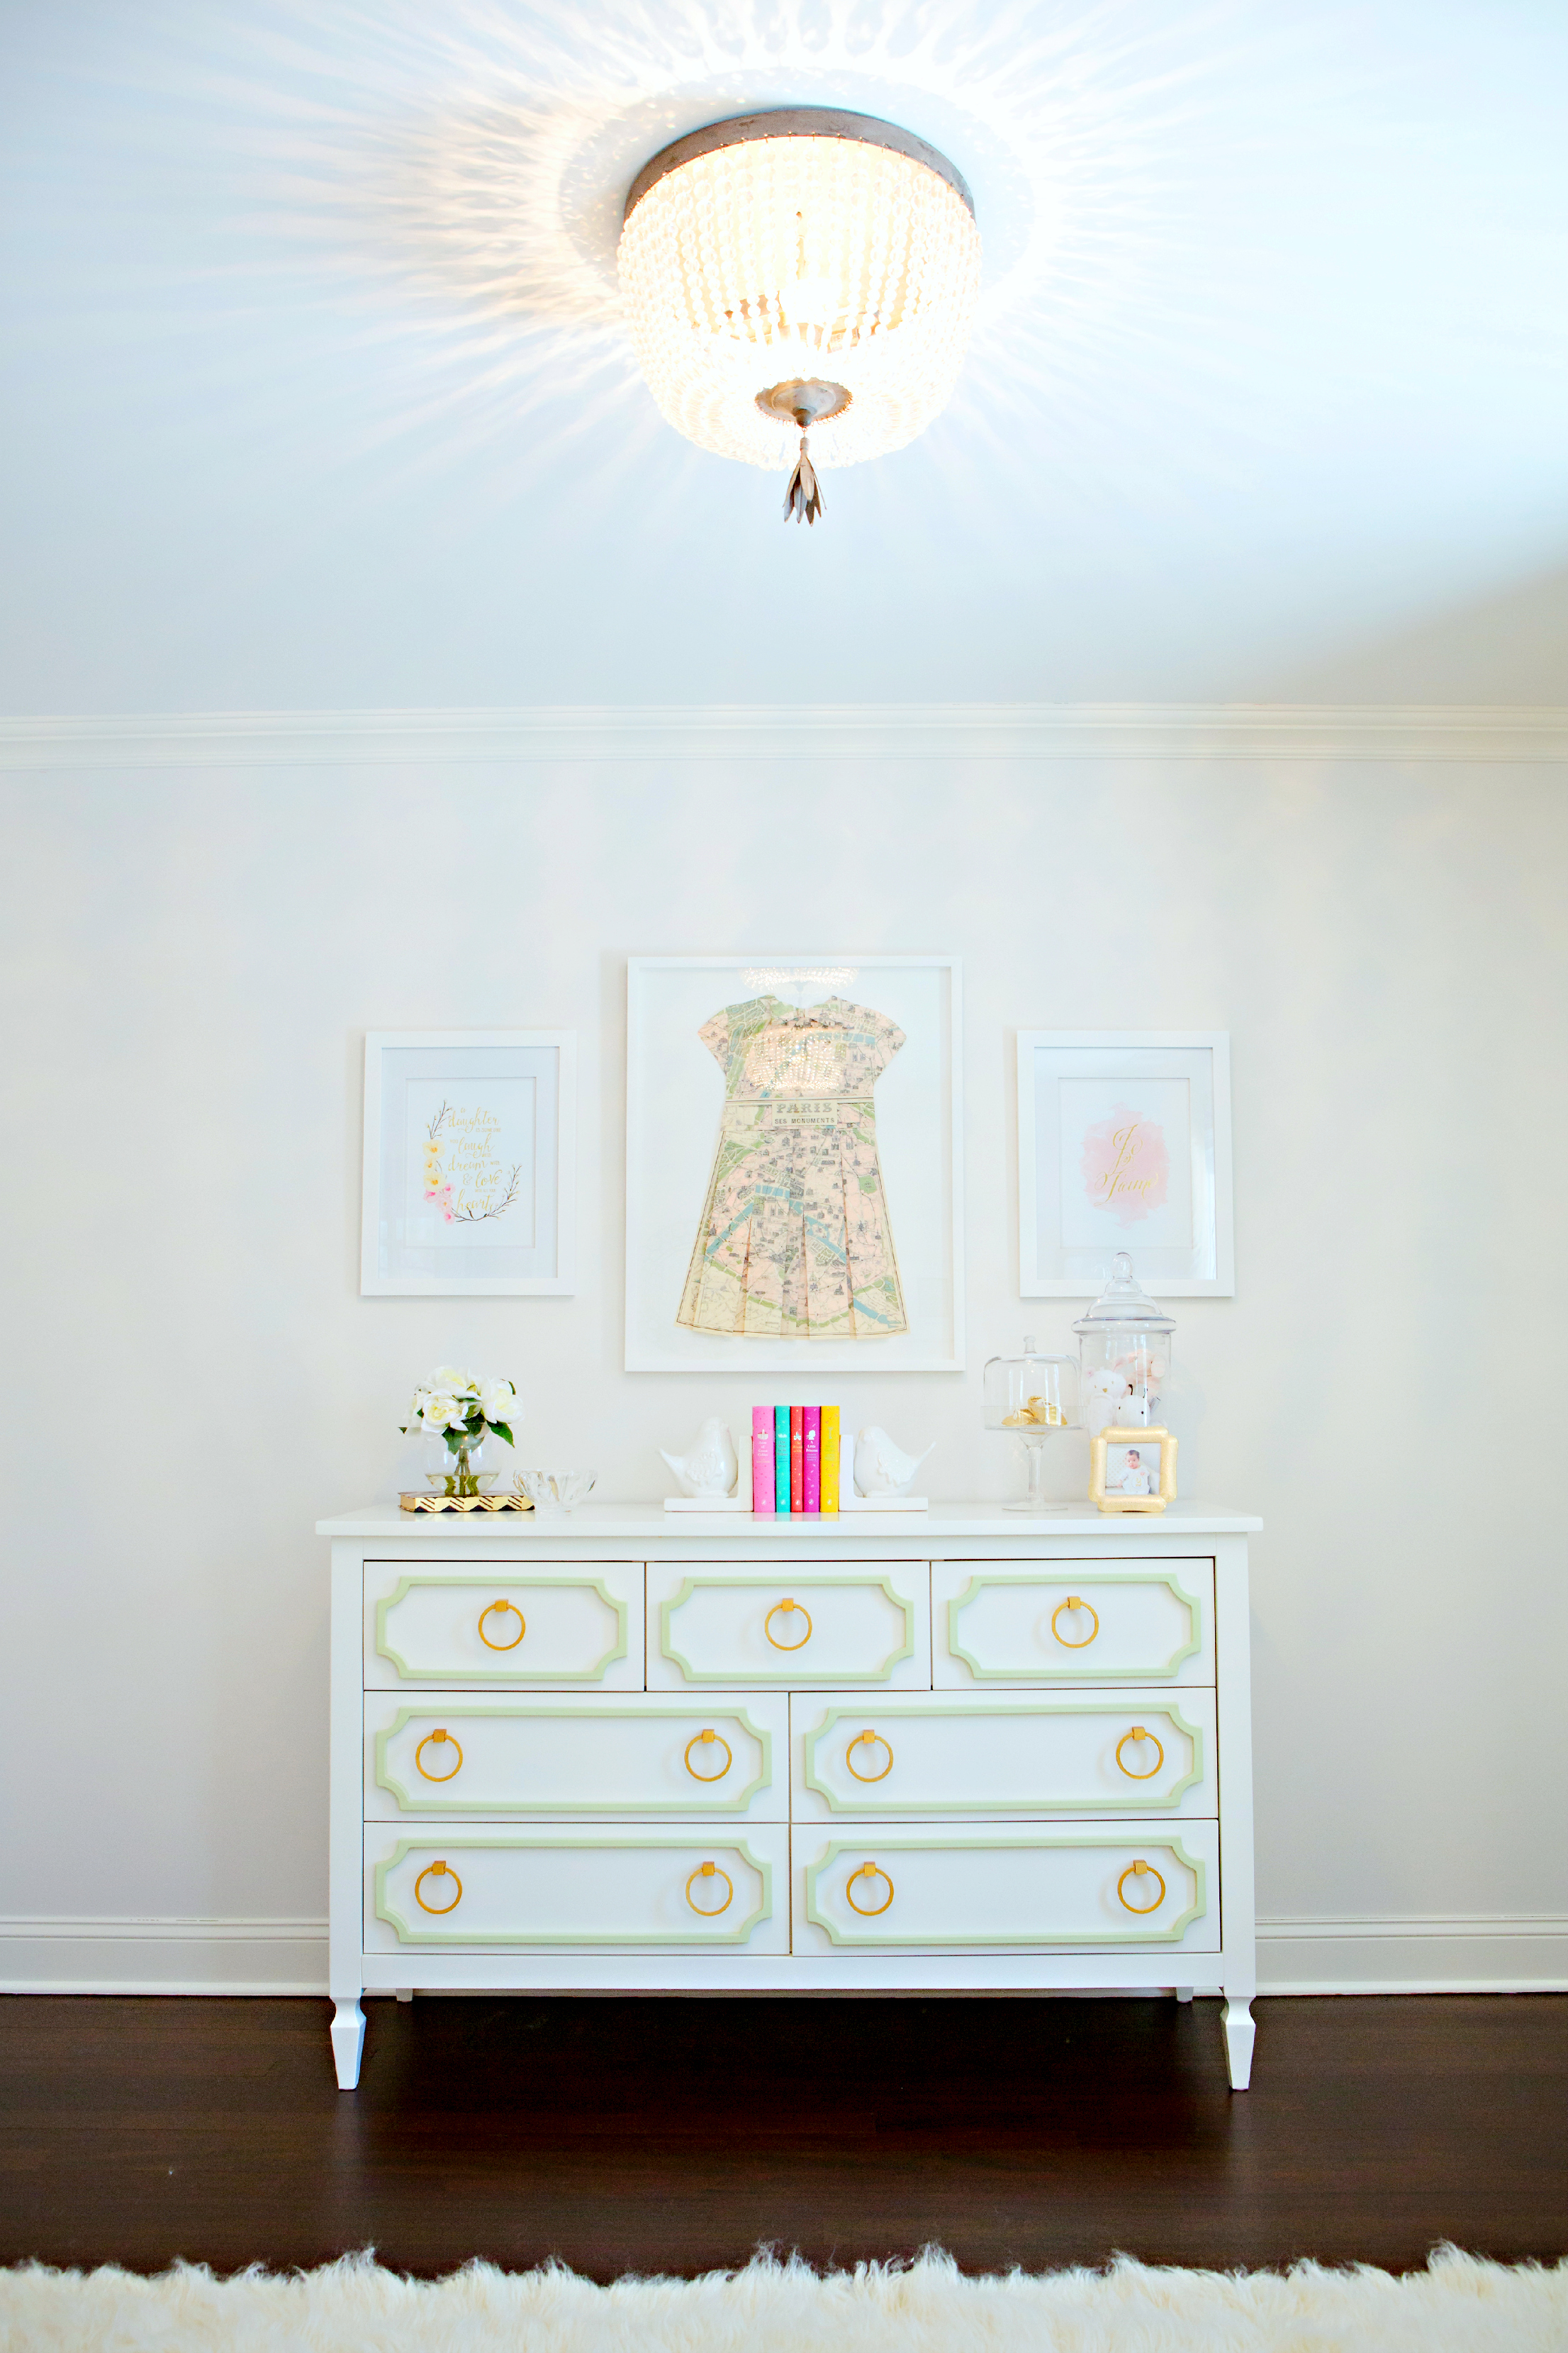 Crystal Flushmount Lighting Fixture and Beverly Dresser - Project Nursery